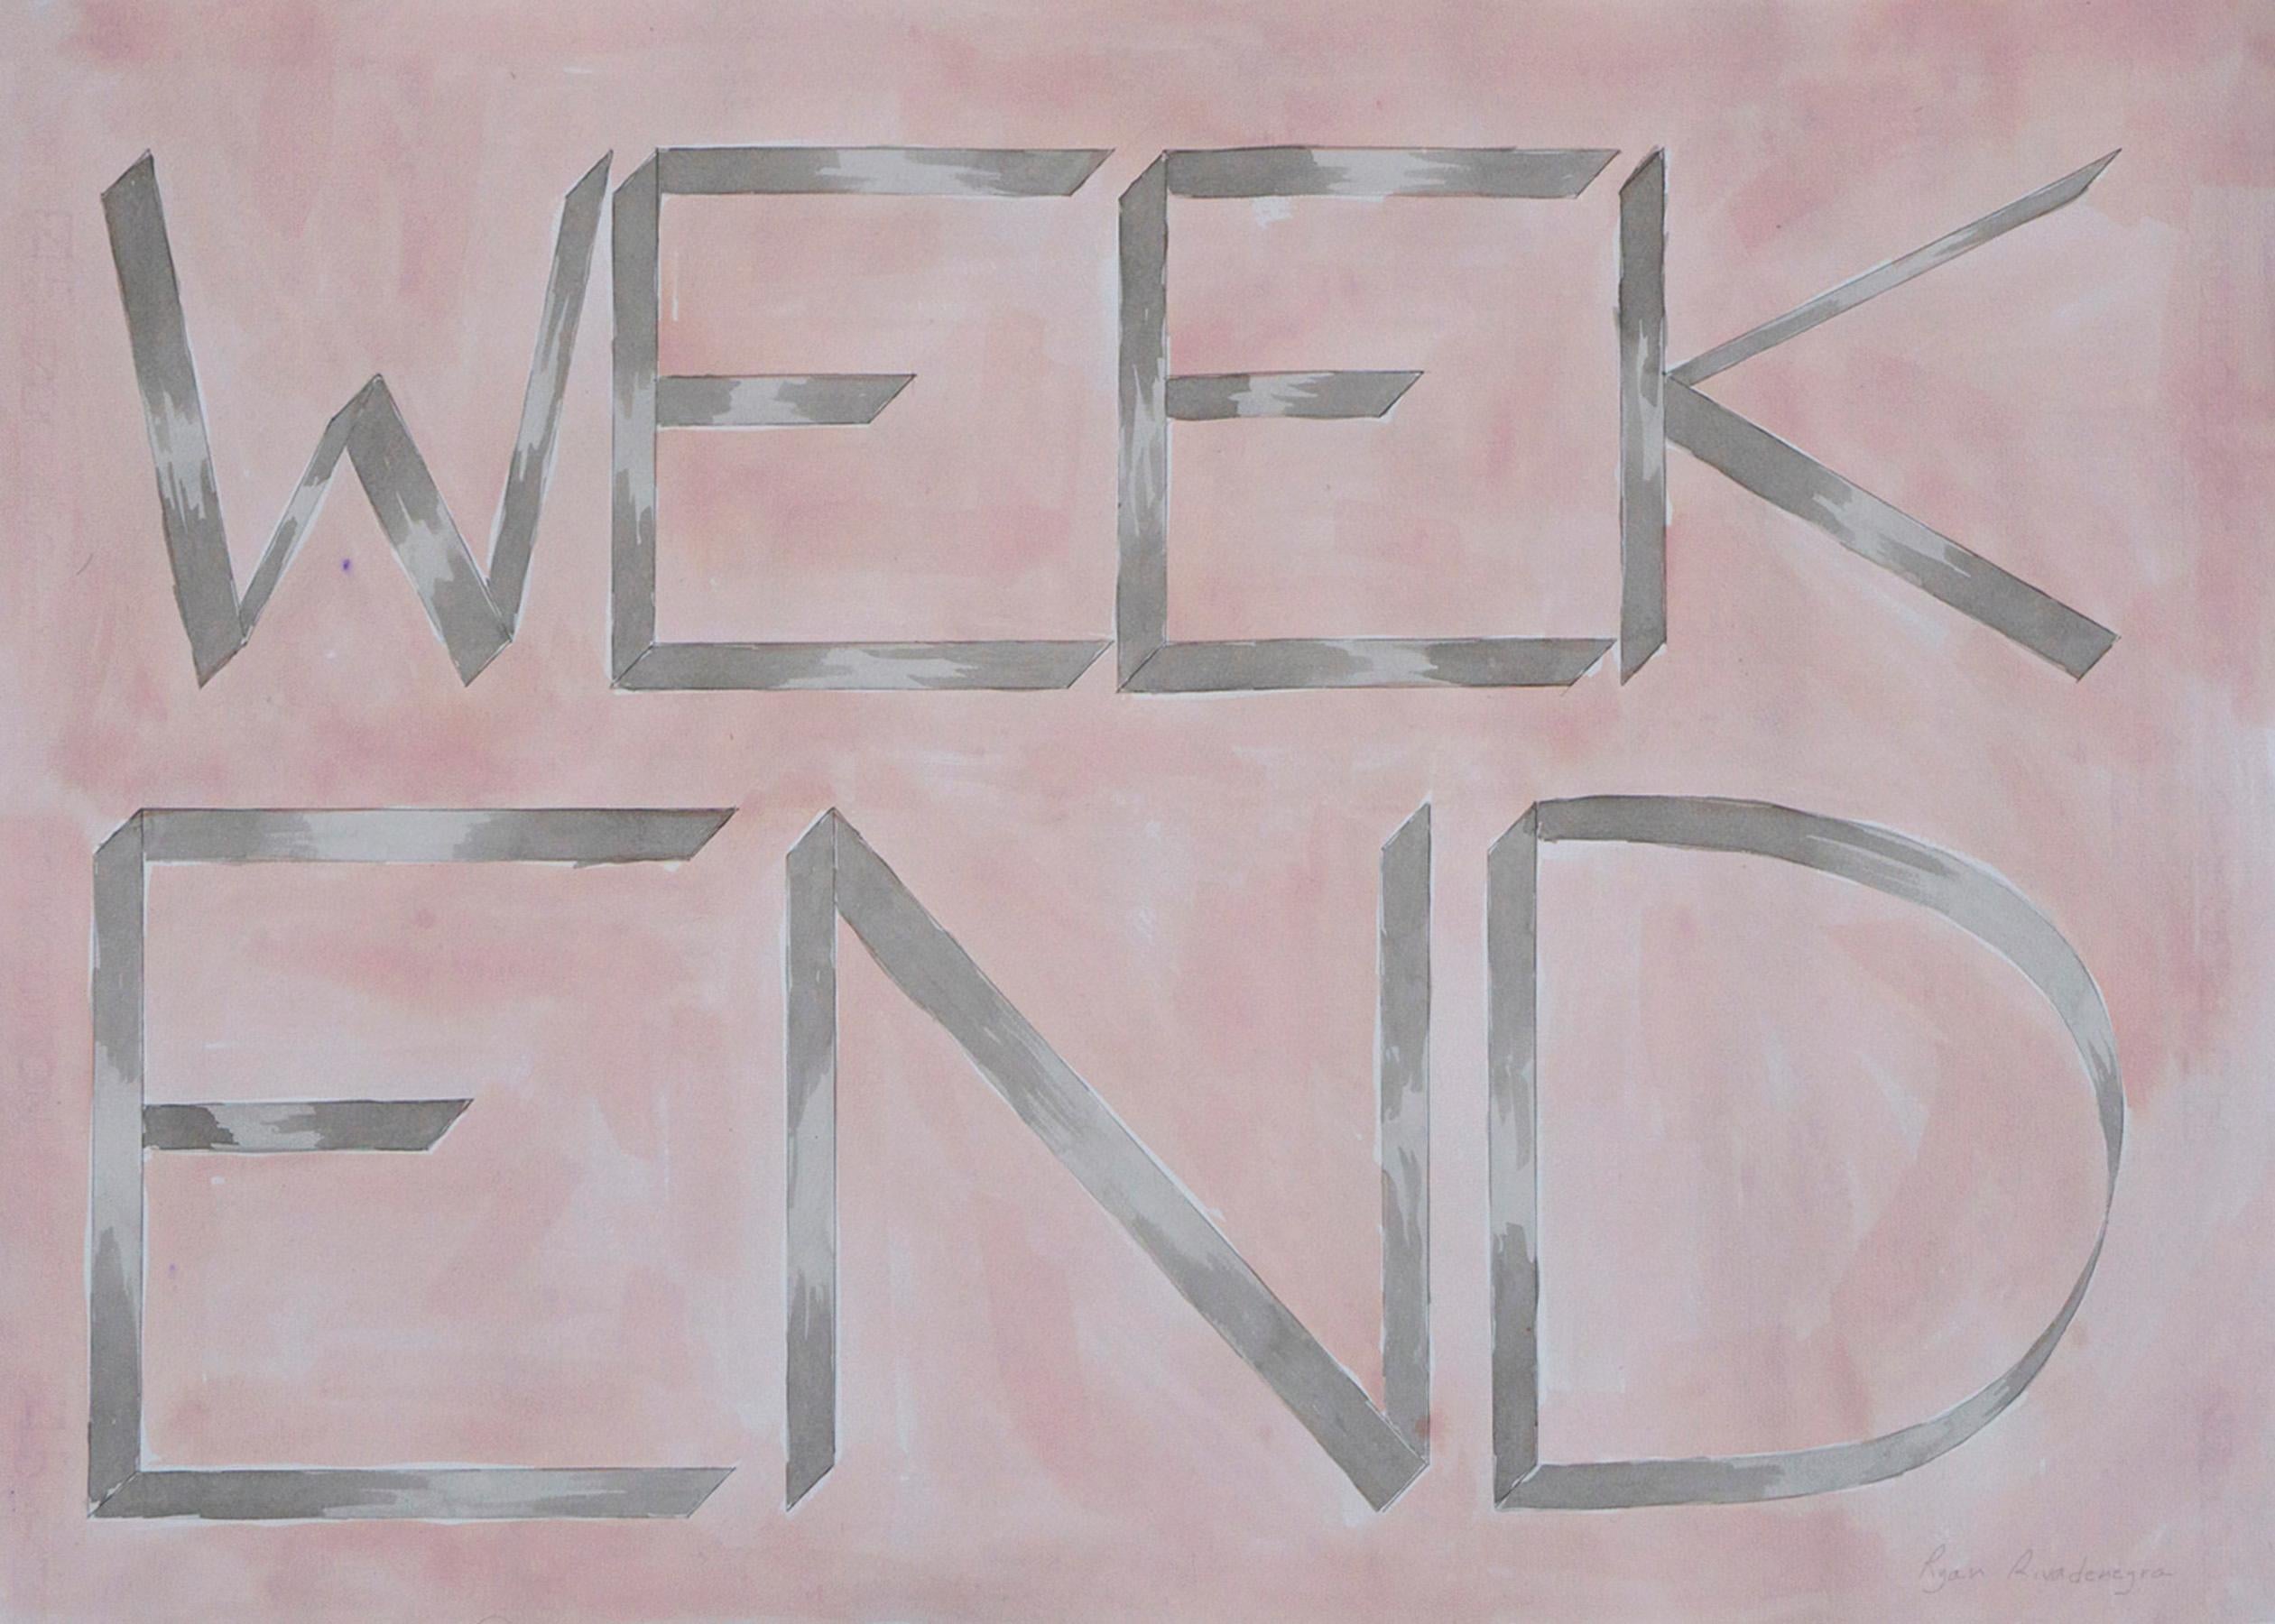 Ryan Rivadeneyra Still-Life Painting - "Weekend", Hand Painted Watercolor, Drawing, Inspirational Saying, 50x70cm